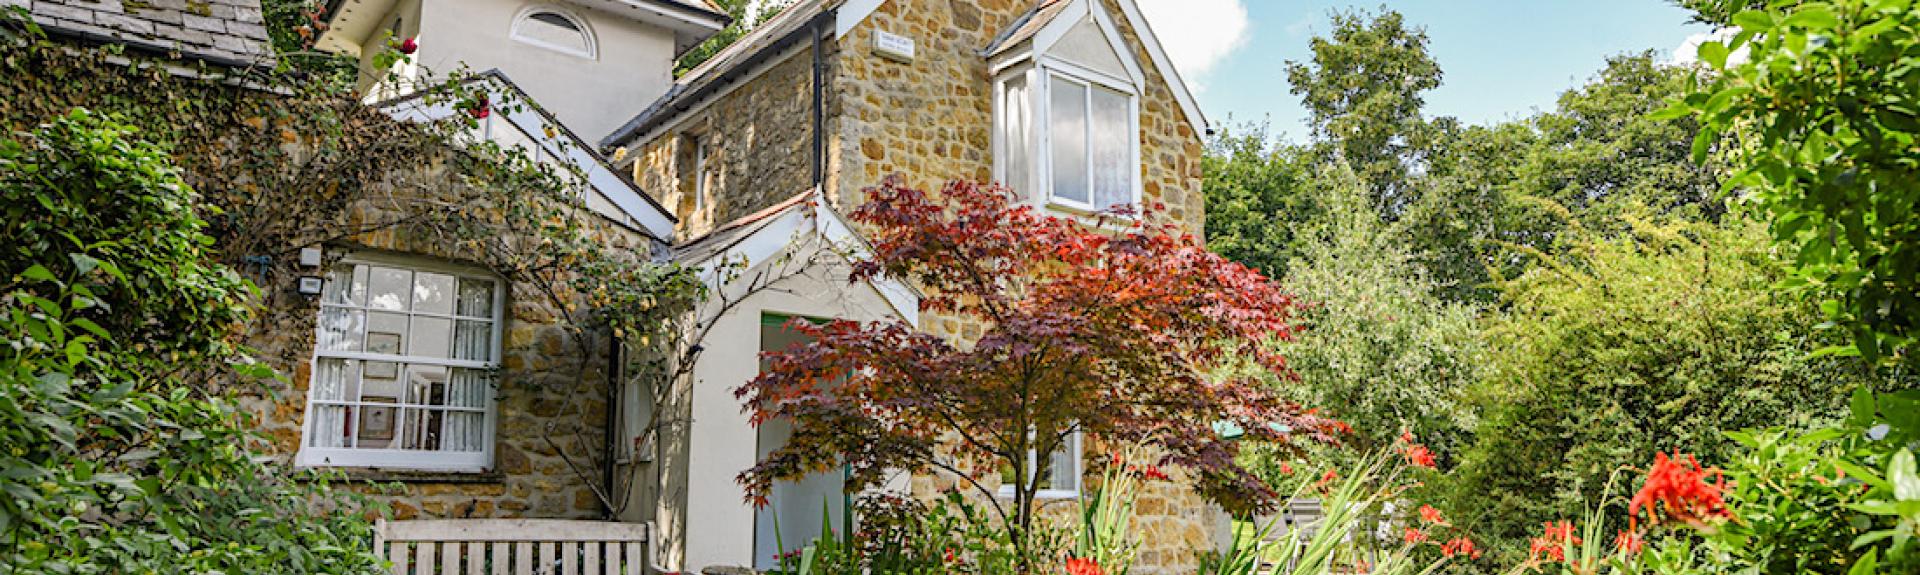 A 2-storey Chideock holiday cottage with a tower surrounded by a flower-filled garden.